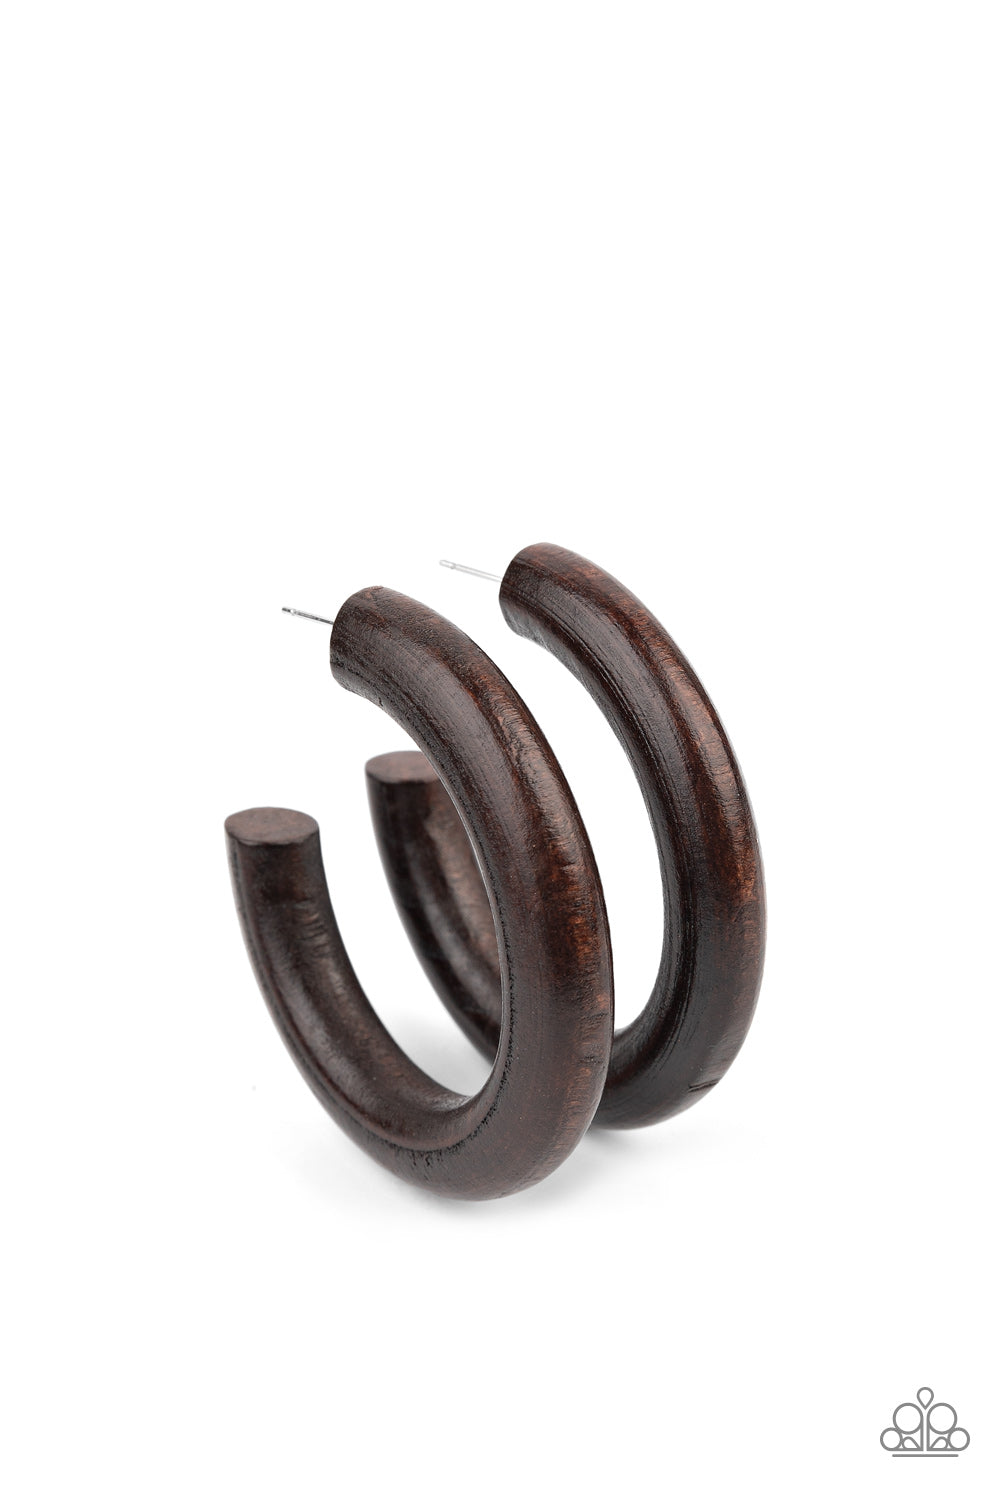 Paparazzi Woodsy Wonder - Brown Wooden Earrings - A Finishing Touch Jewelry